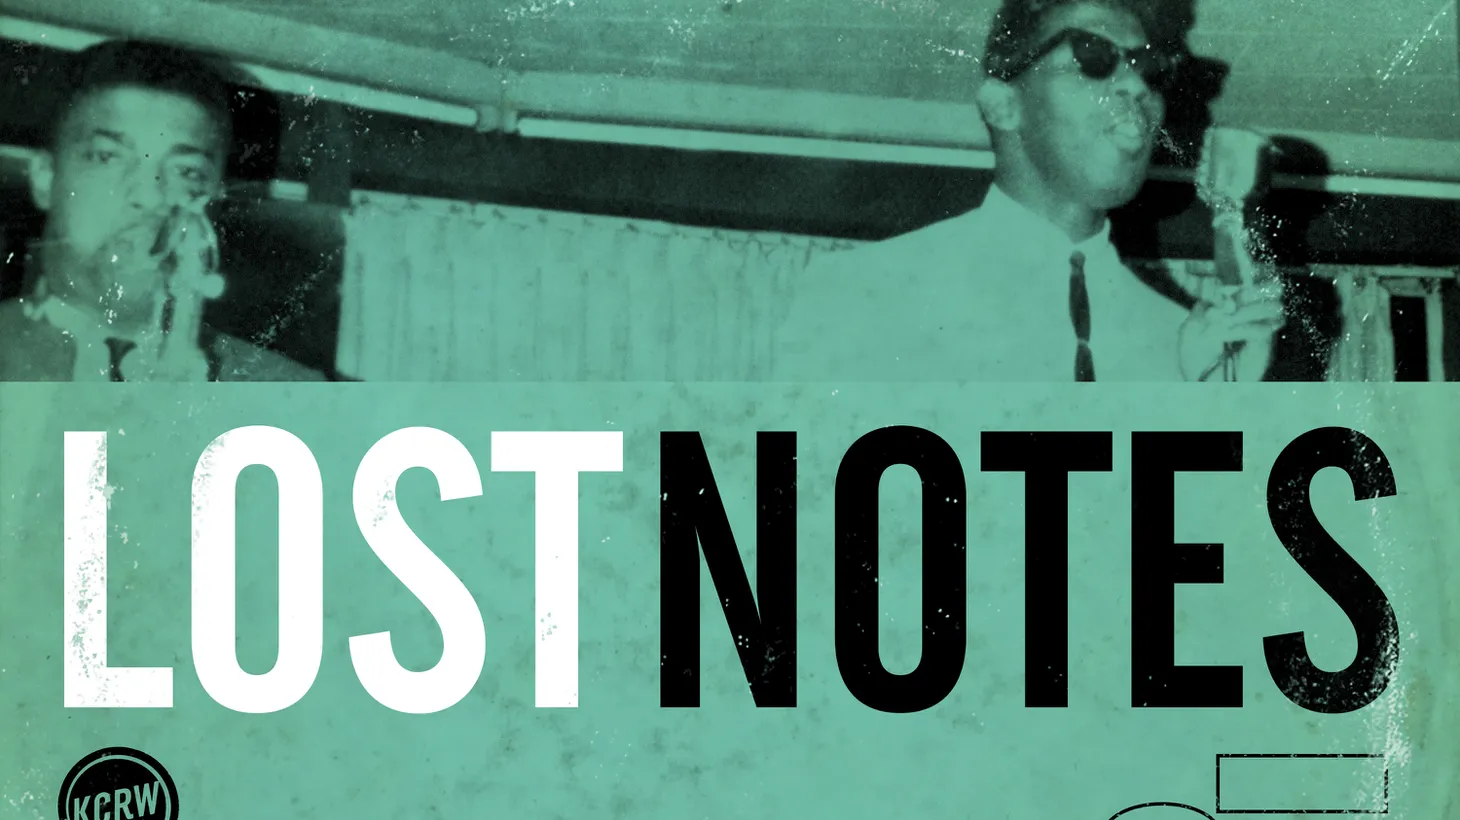 Hear a preview of Lost Notes, an anthology of some of the greatest music stories never truly told. Top journalists present stand-alone audio documentaries that highlight music’s head, heart and beat, with host Solomon Georgio as your guide.